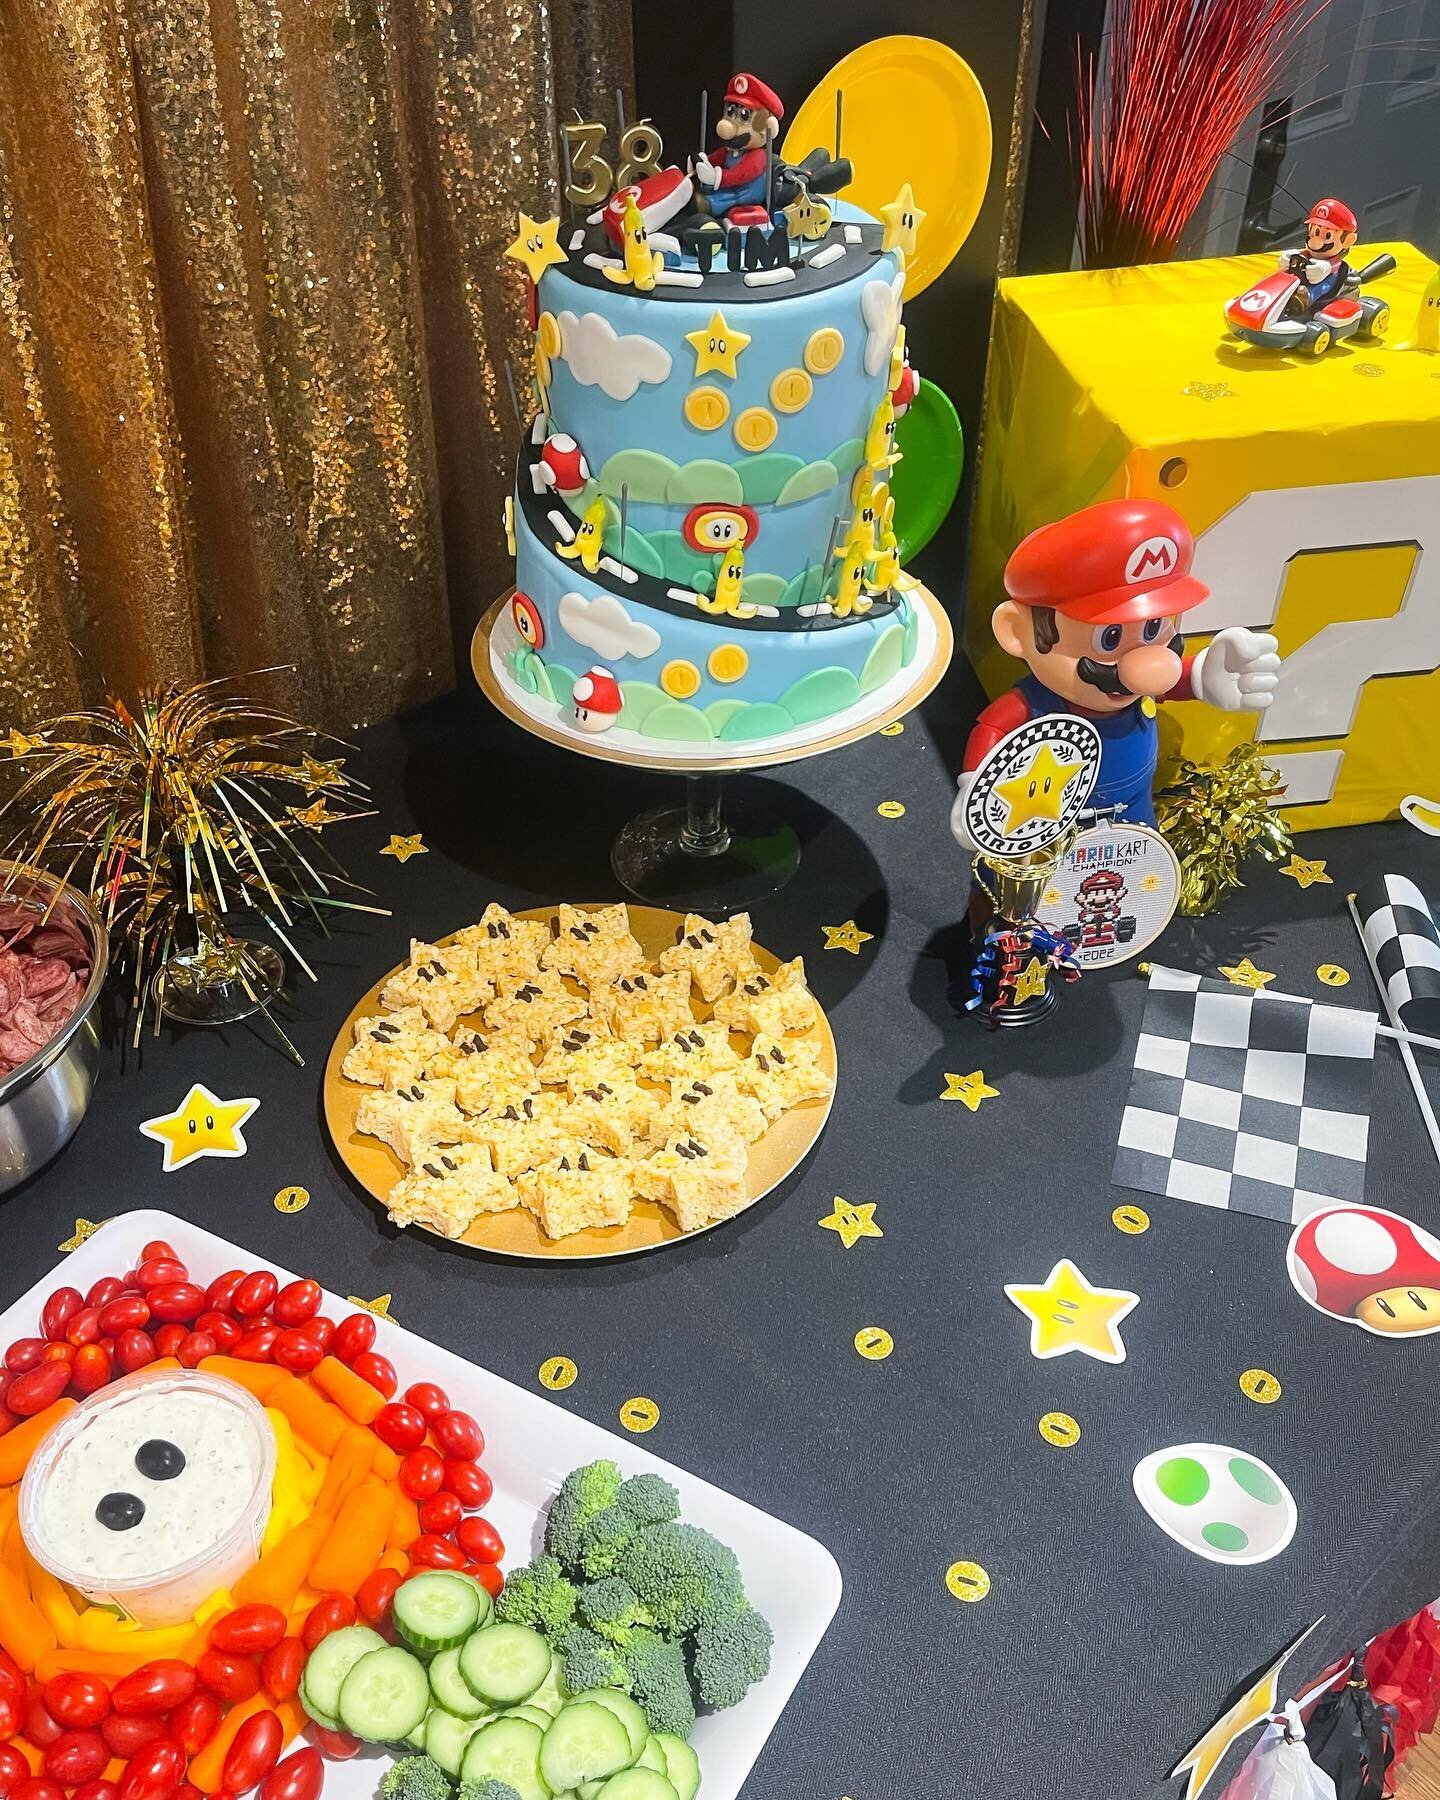 Mario Kart Party Con&rsquo;t! 🎉

More fun details from this event and check out that cake! 😍💜

Design + Styling: @allisongrayevents
Themed food: @kimberlyjane12 
Cake: Our clients super talented neighbour!!
.
.
.
.
#allisongrayevents #calgarybuzz 